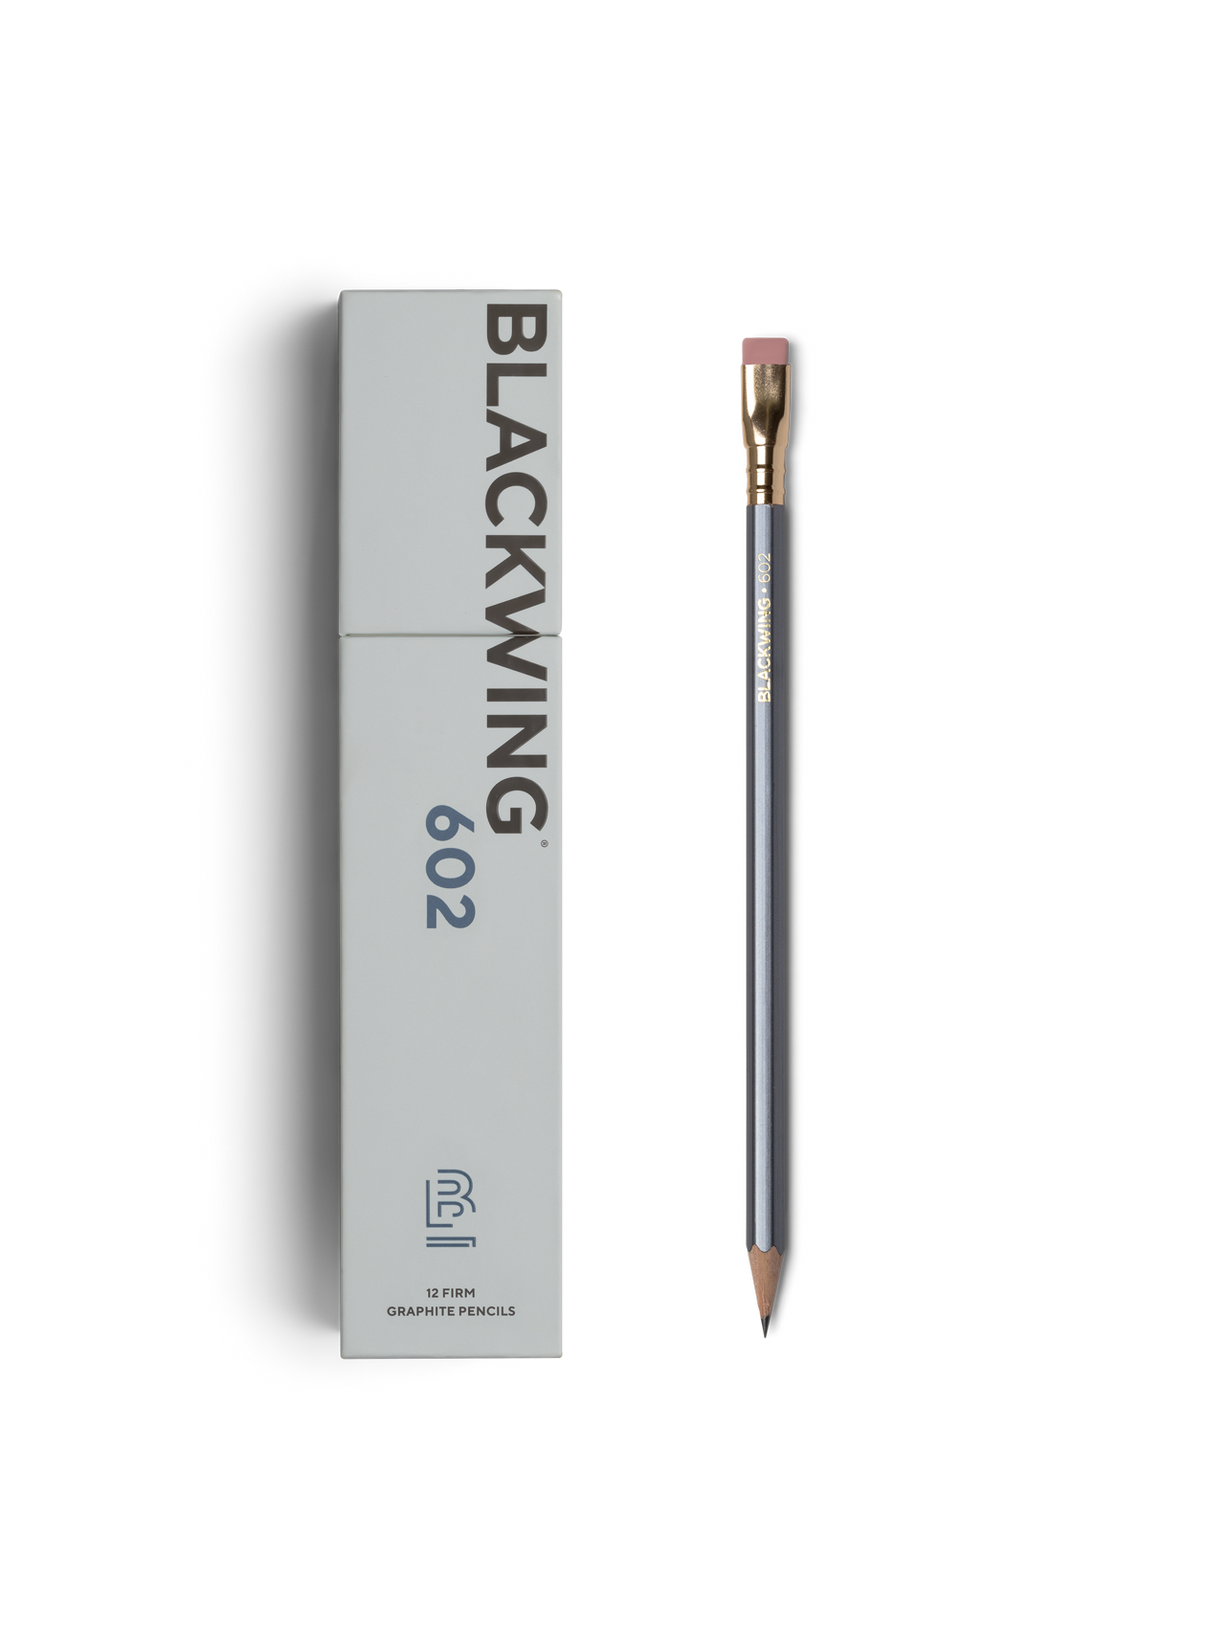 Palomino Blackwing Black Pencil (Soft) Box of 12 - oblation papers & press